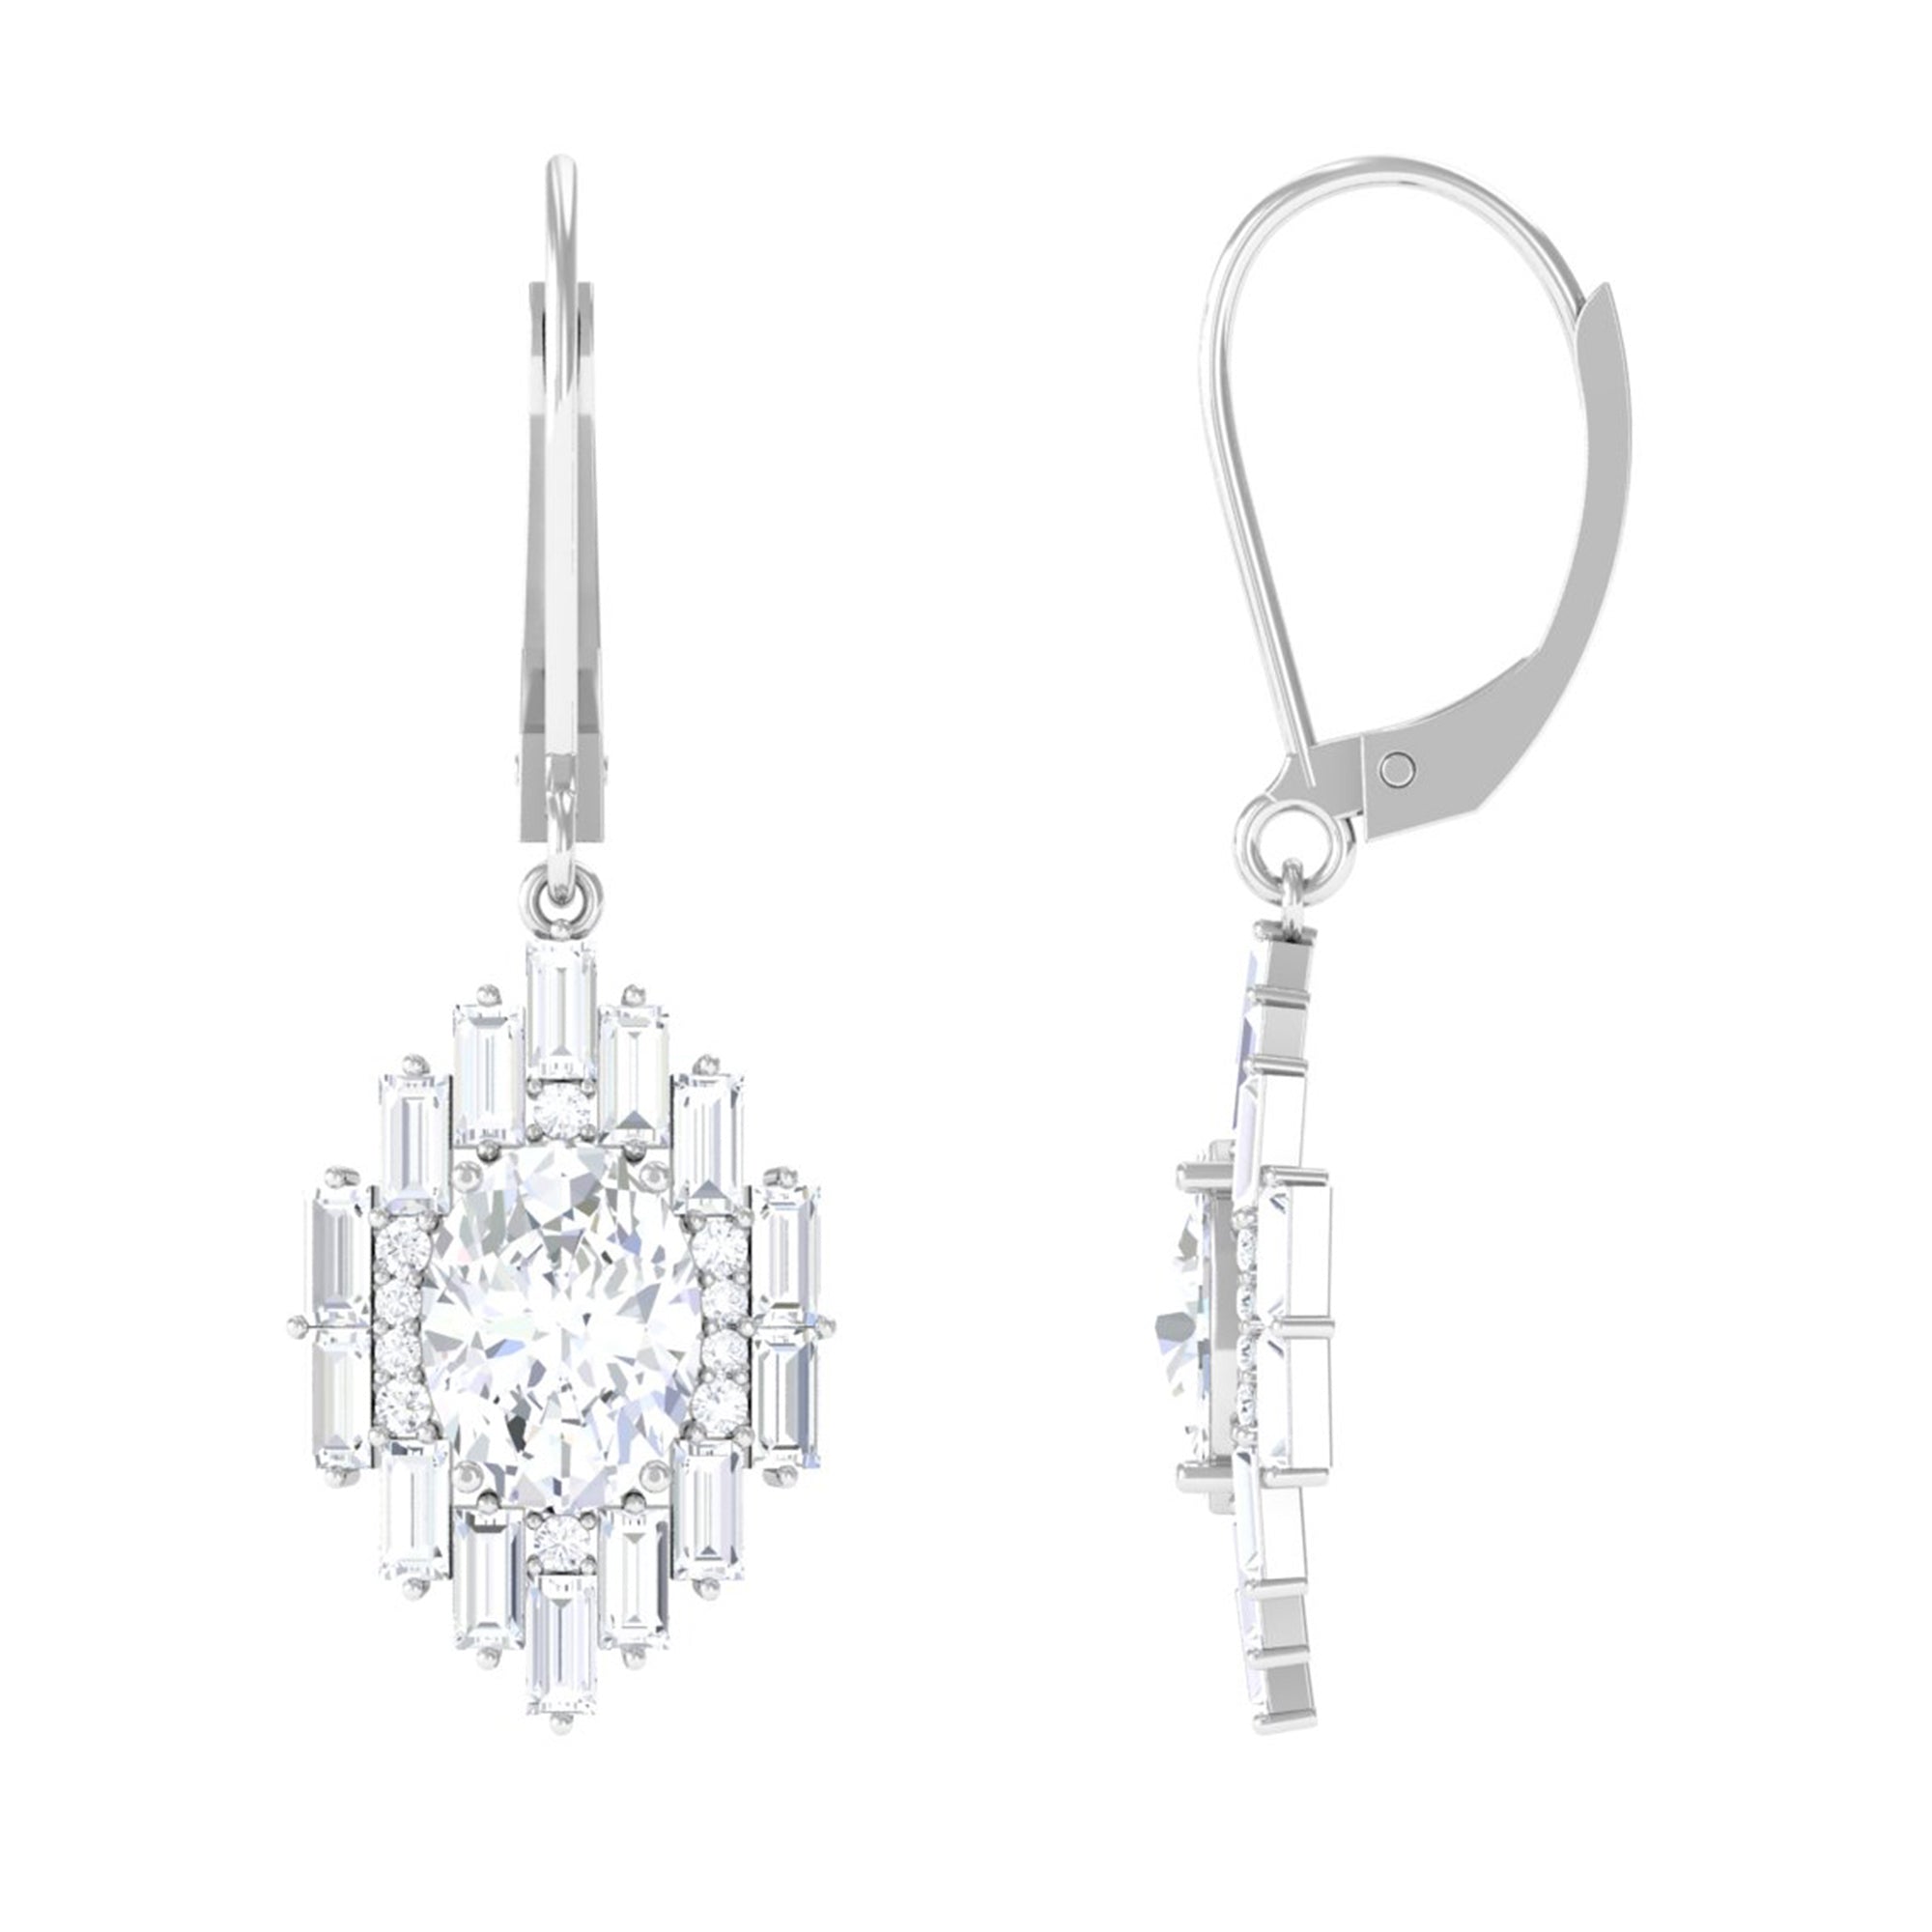 Sparkanite Jewels-Cluster Moissanite Drop Earrings with Lever Back Closure